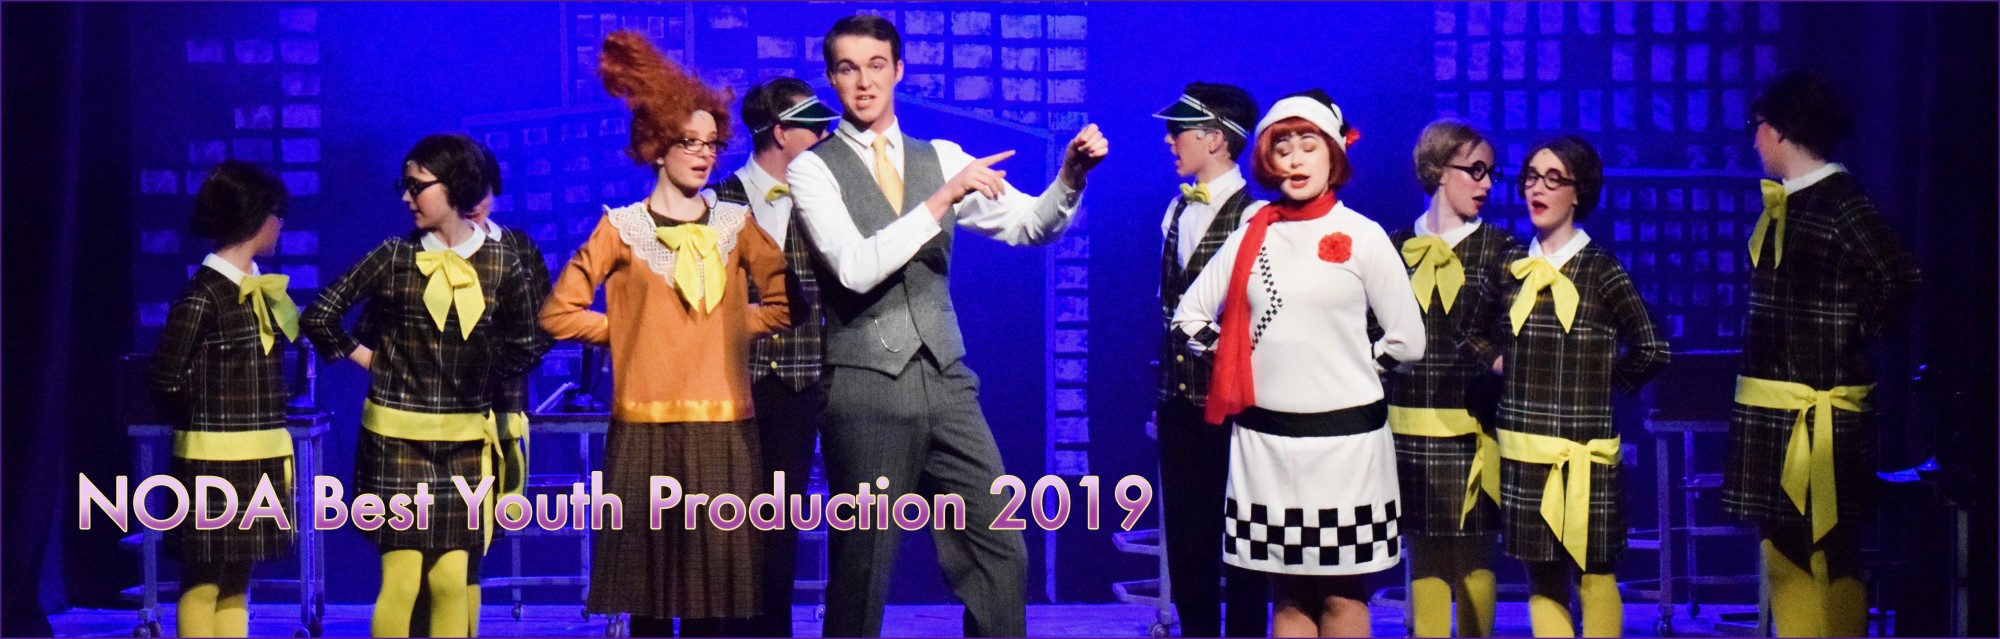 Thoroughly Modern Millie named NODA Best Youth Production